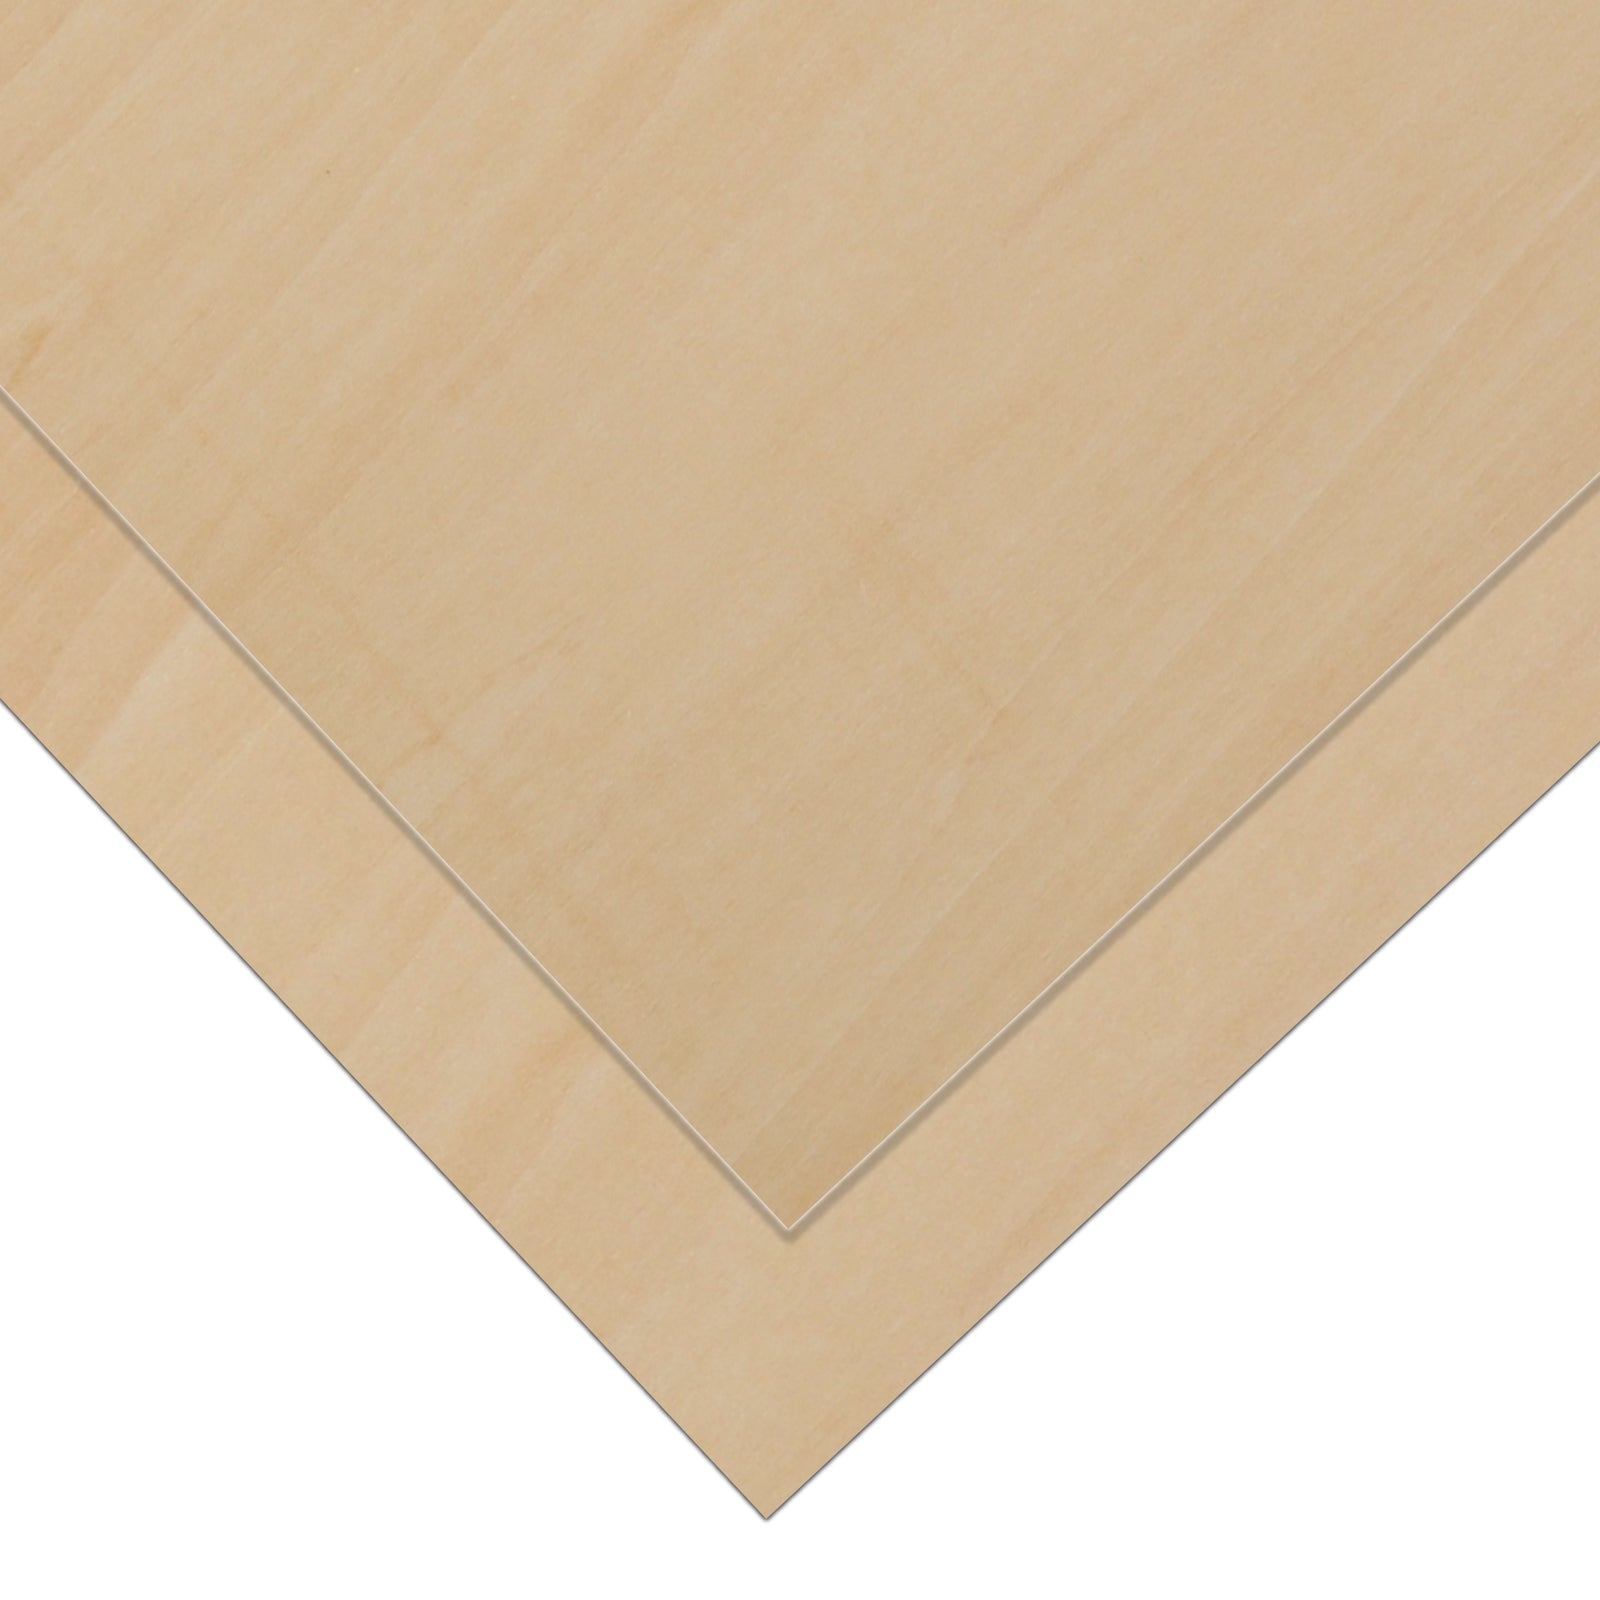 A4 basswood sheet for laser engraving machine